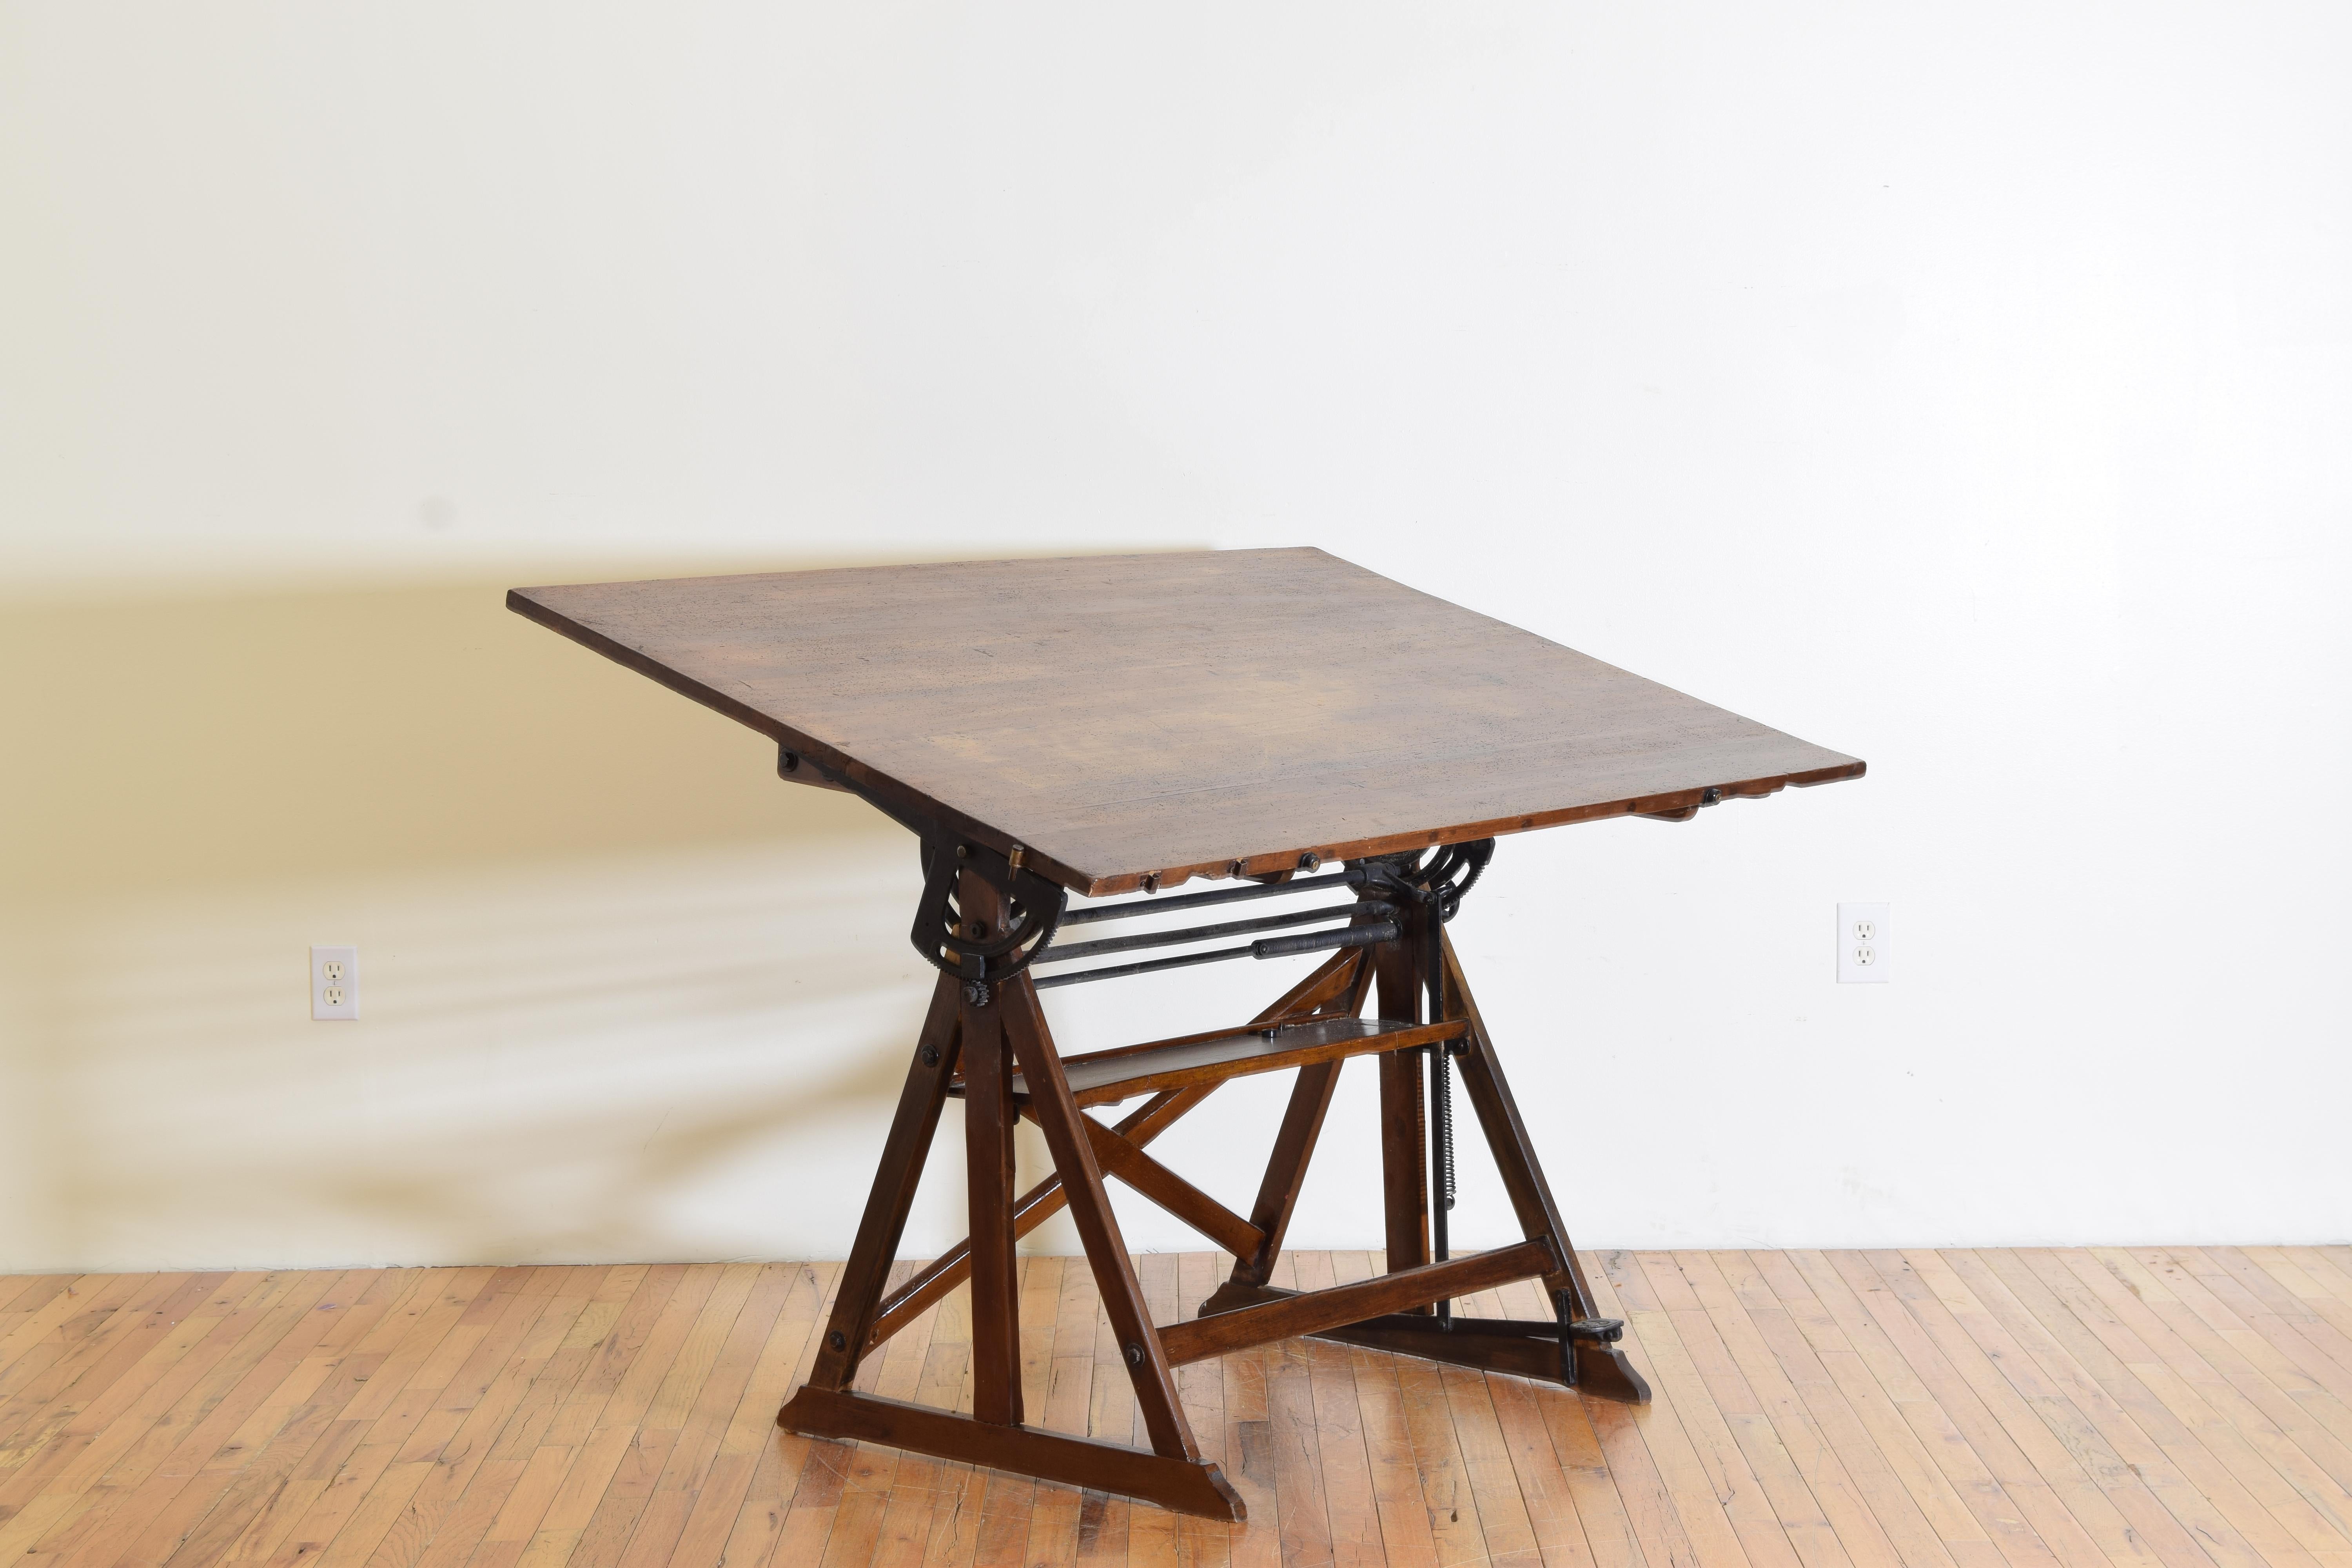 completely functional, having a large working surface atop triangular trestle form legs on bracket feet and a tray at mid height acting as a stretcher, within the frame is an elaborate iron adjusting system with a large counter-weight and a foot